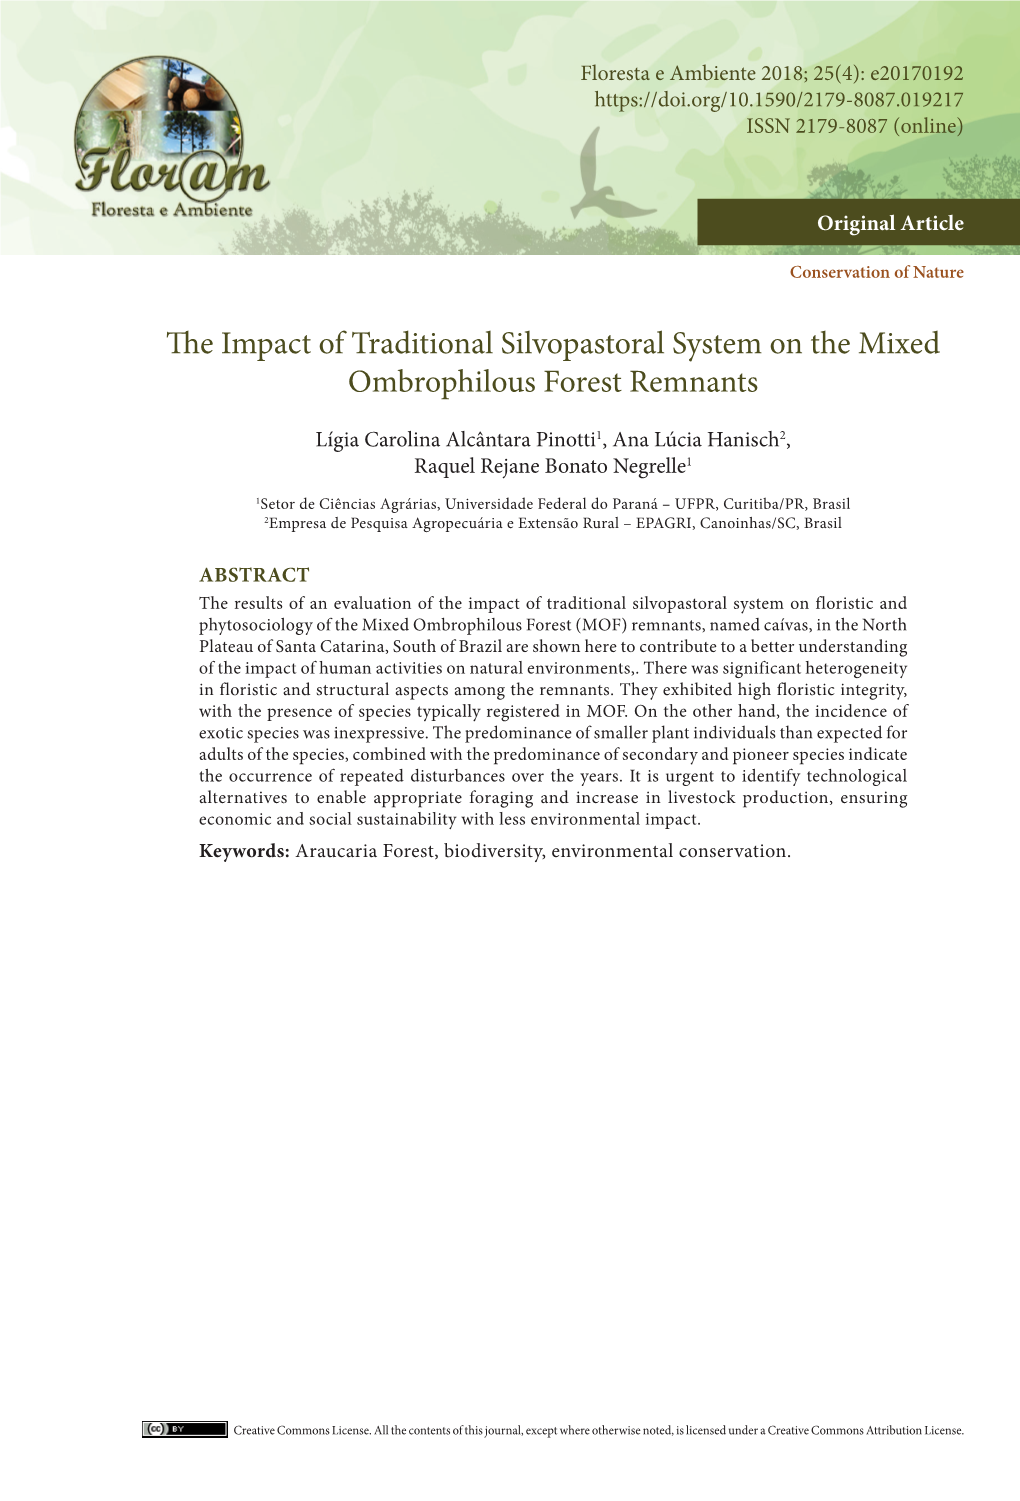 The Impact of Traditional Silvopastoral System on the Mixed Ombrophilous Forest Remnants